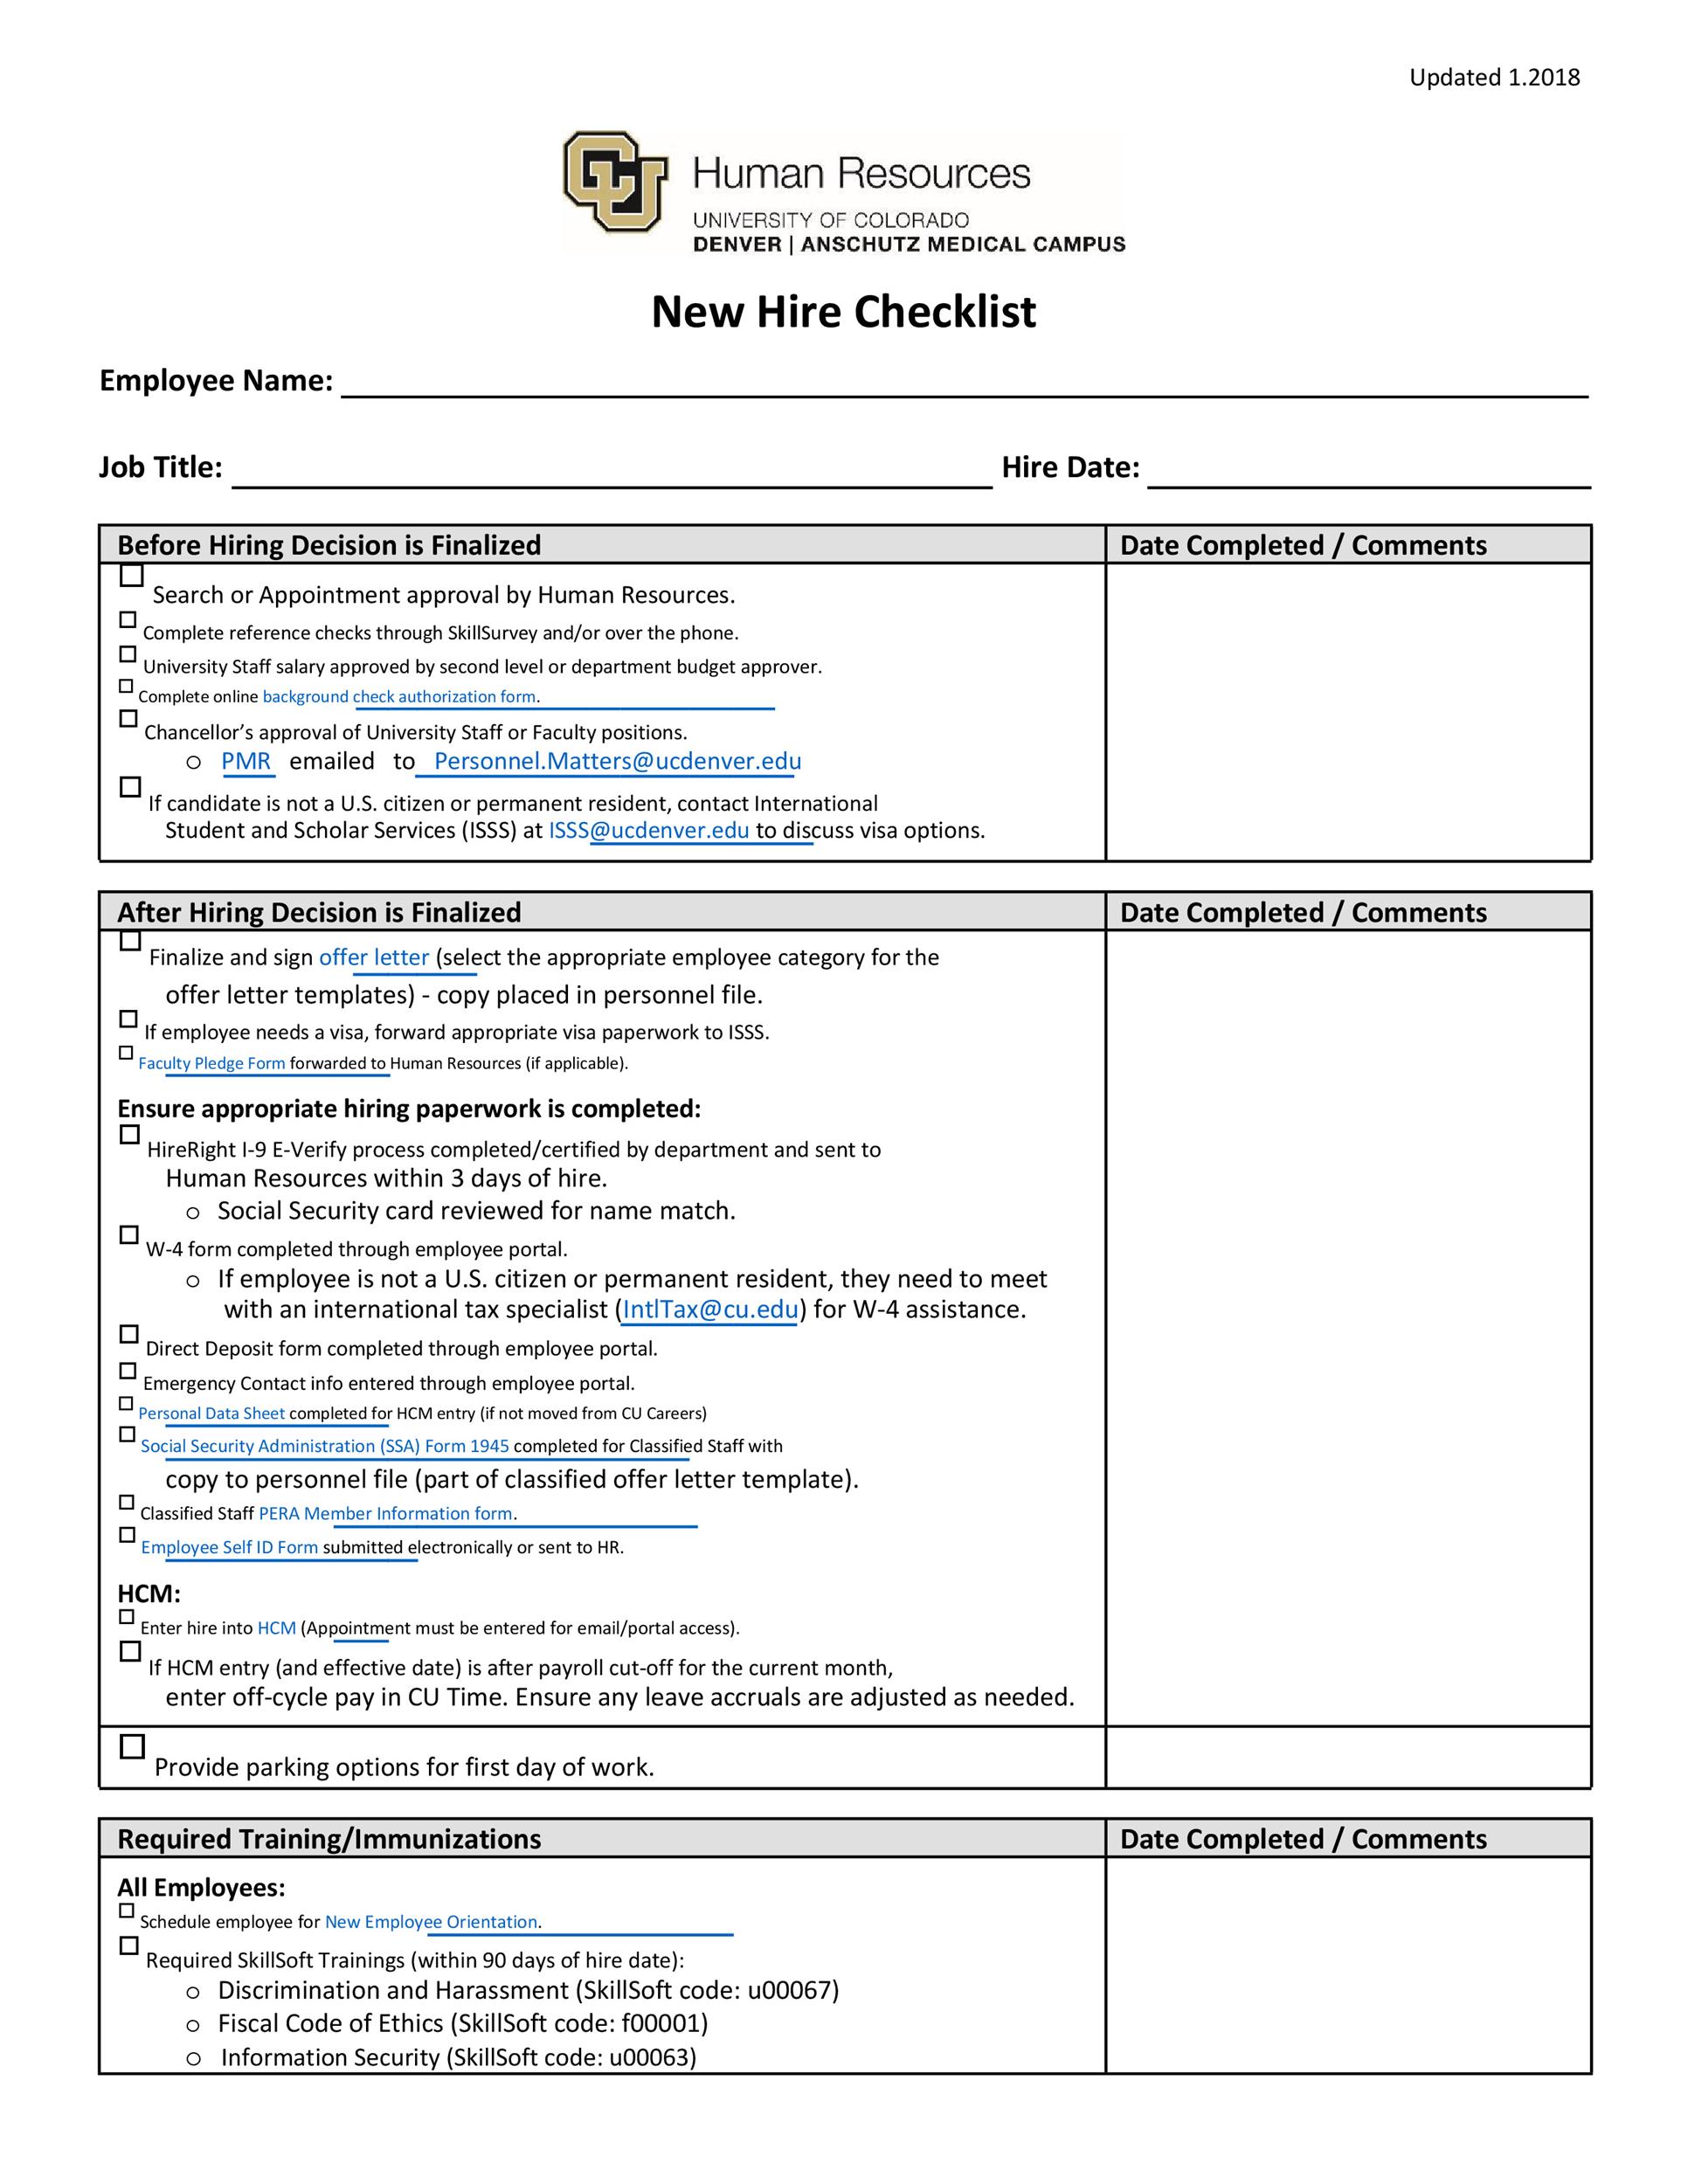 New Employee Onboarding Checklist Template Excel TUTORE ORG Master